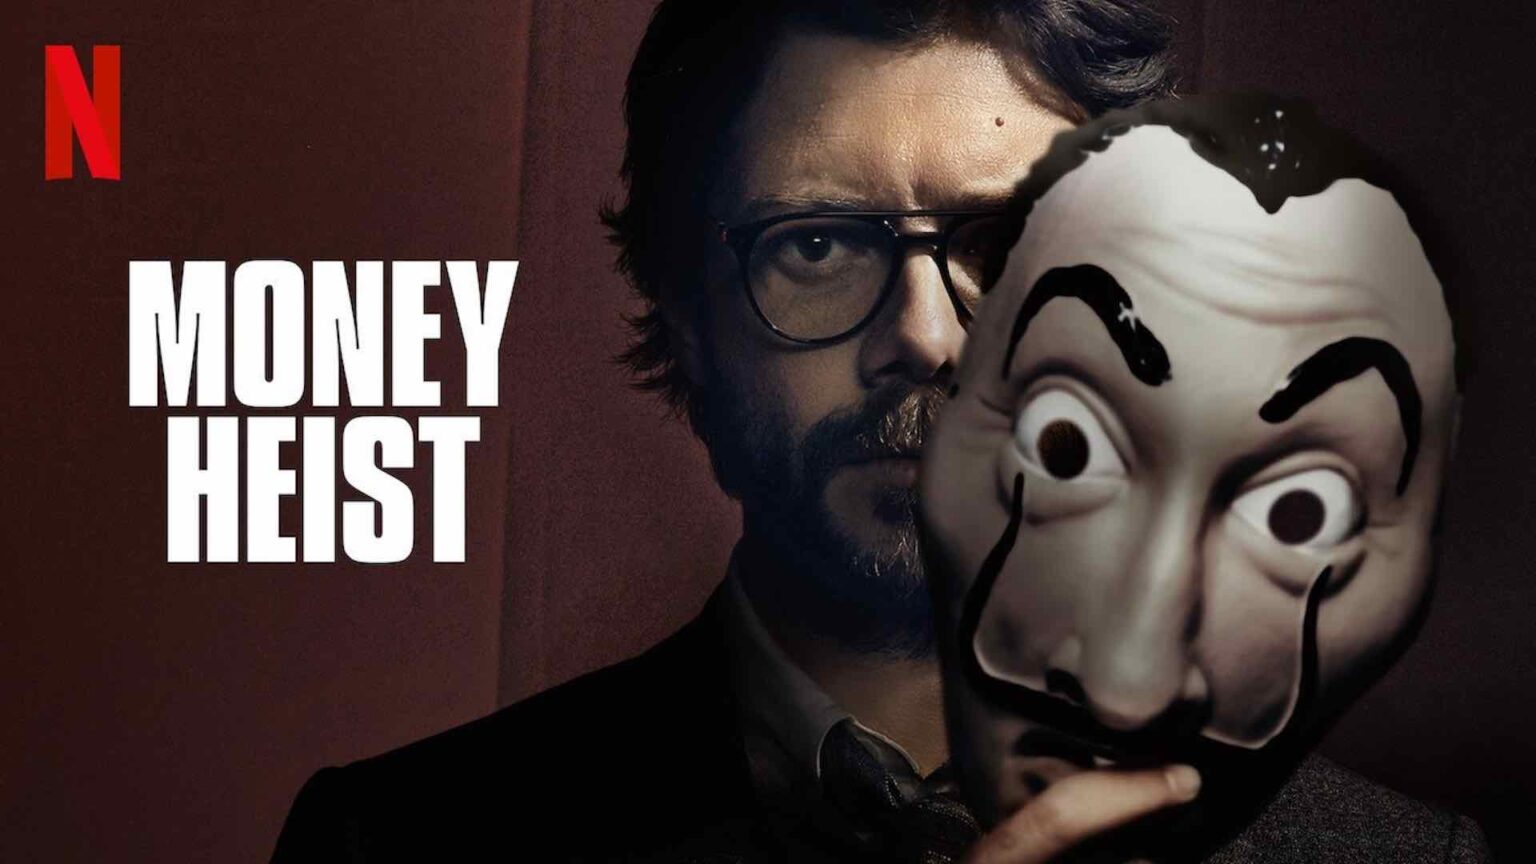 Satiate your need for season 5 of 'Money Heist' with these epic fan-made trailers. These videos are creative and fun tributes to the show.